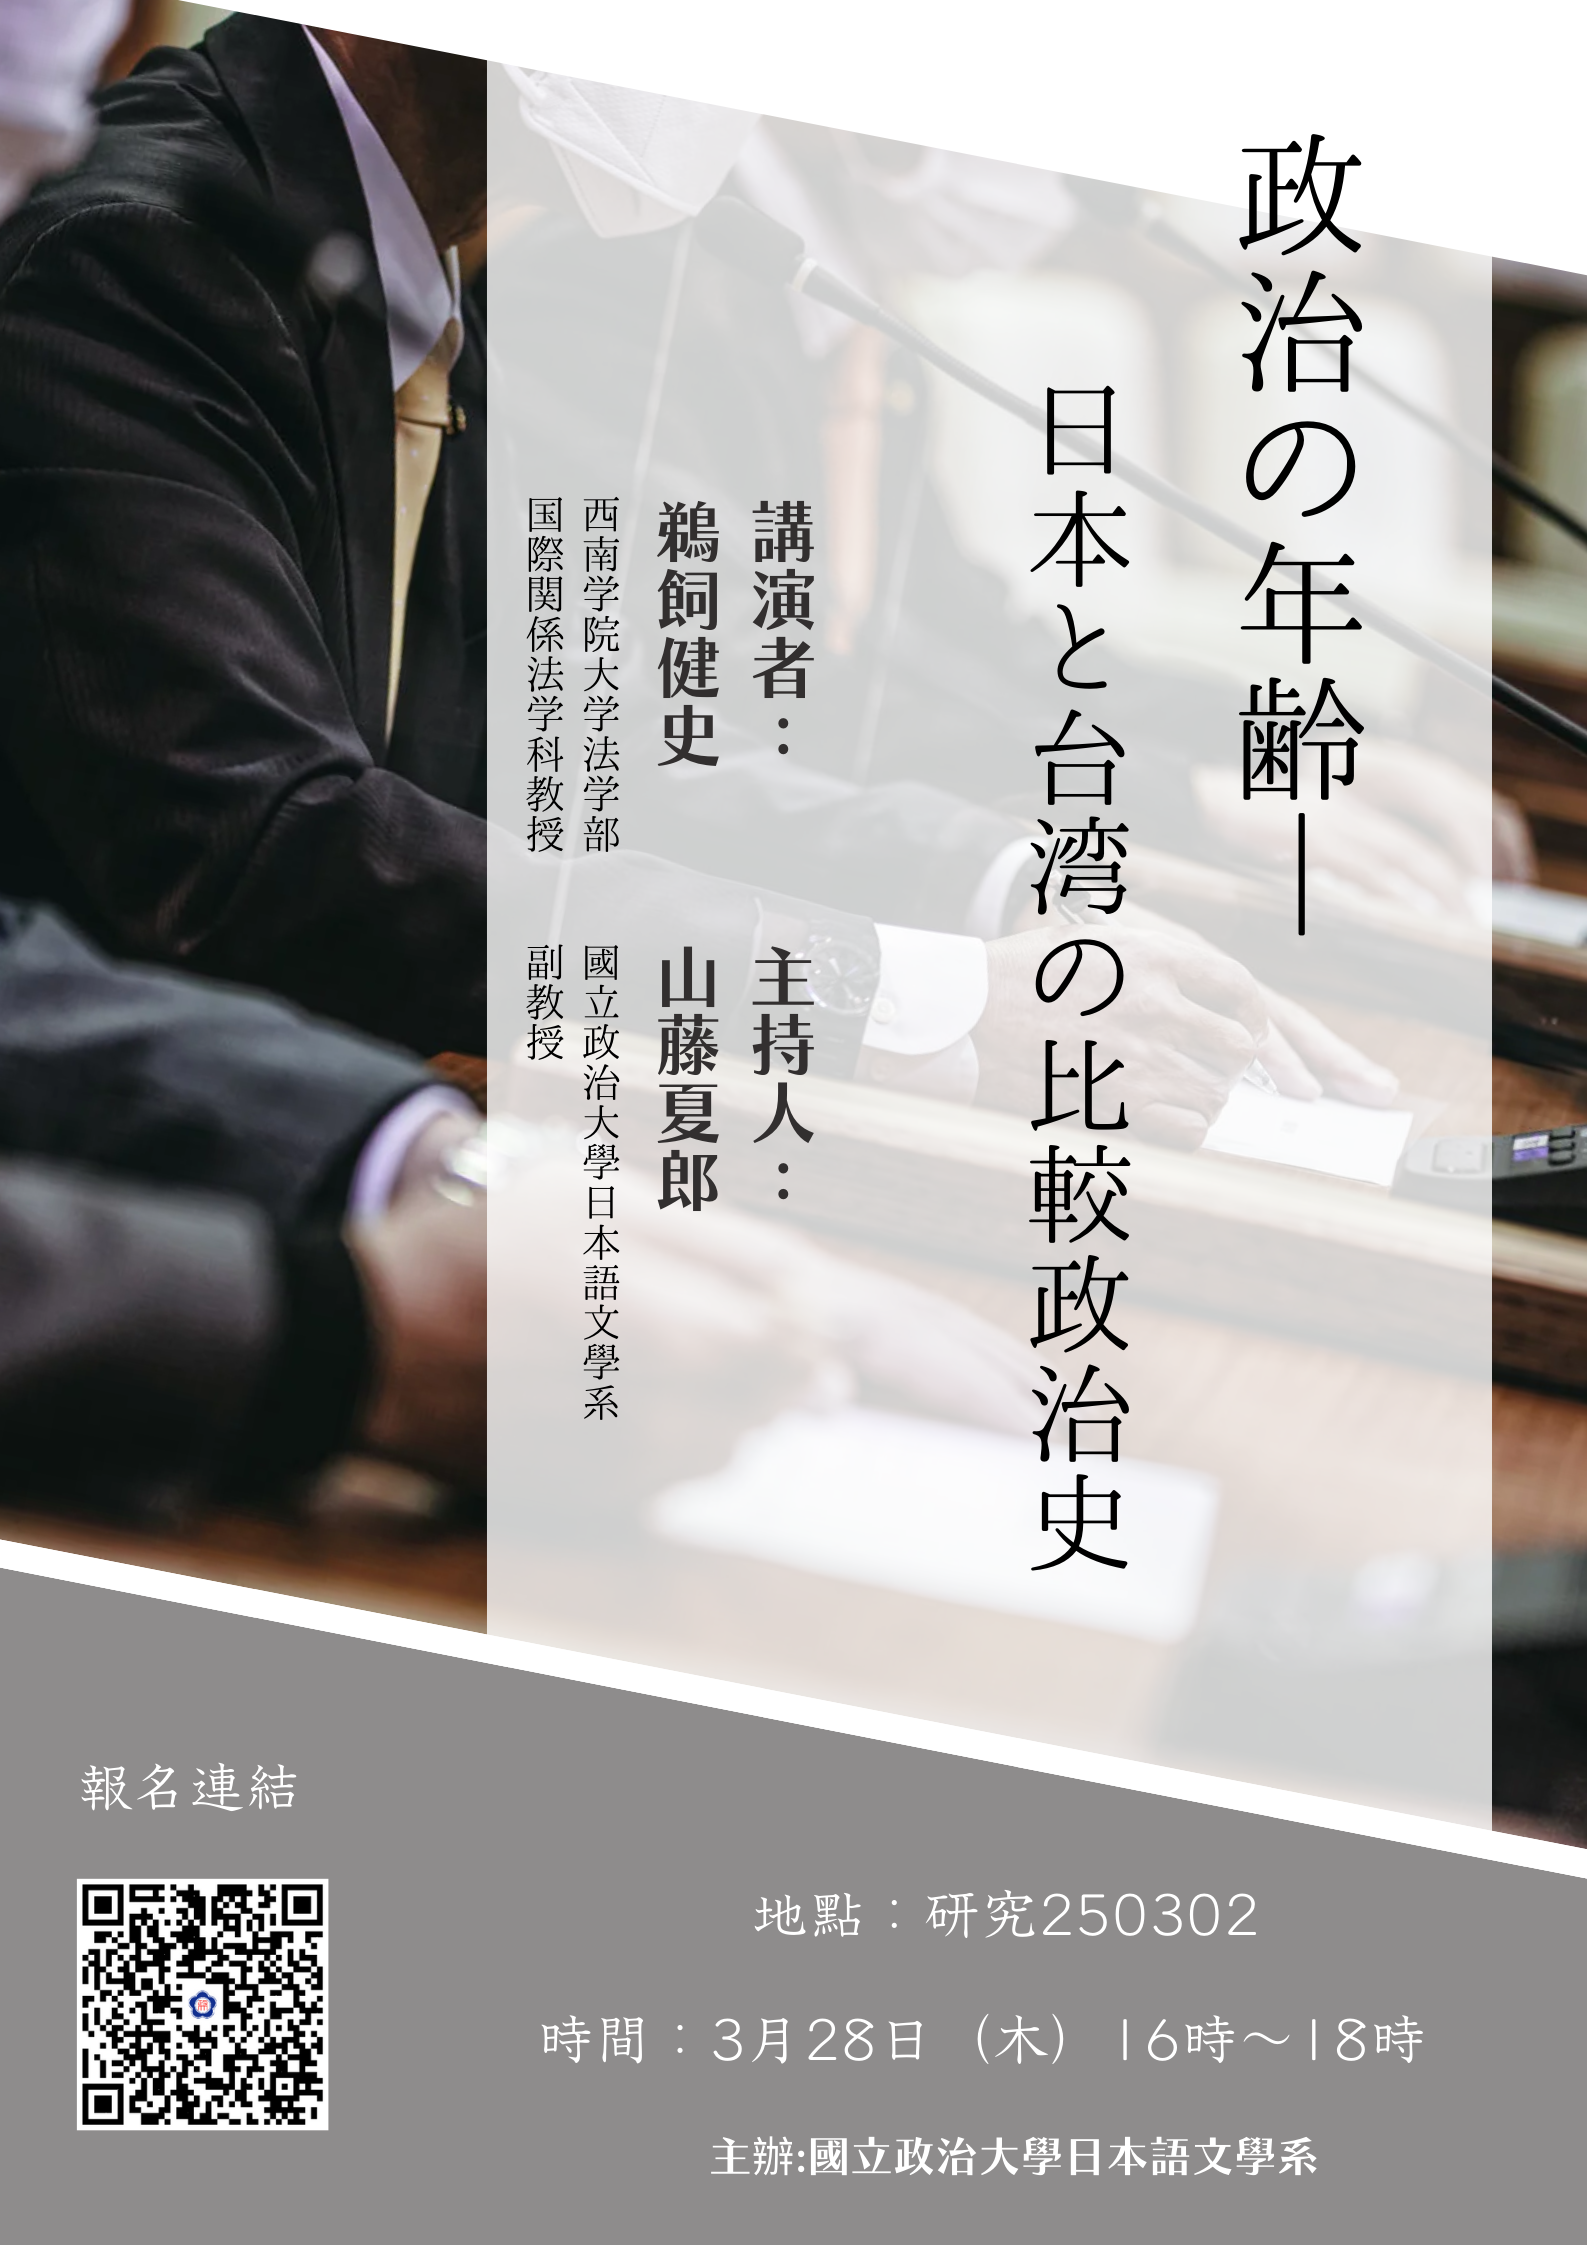 【speech】The Age of Politics: A Comparative Political History of Japan and Taiwan